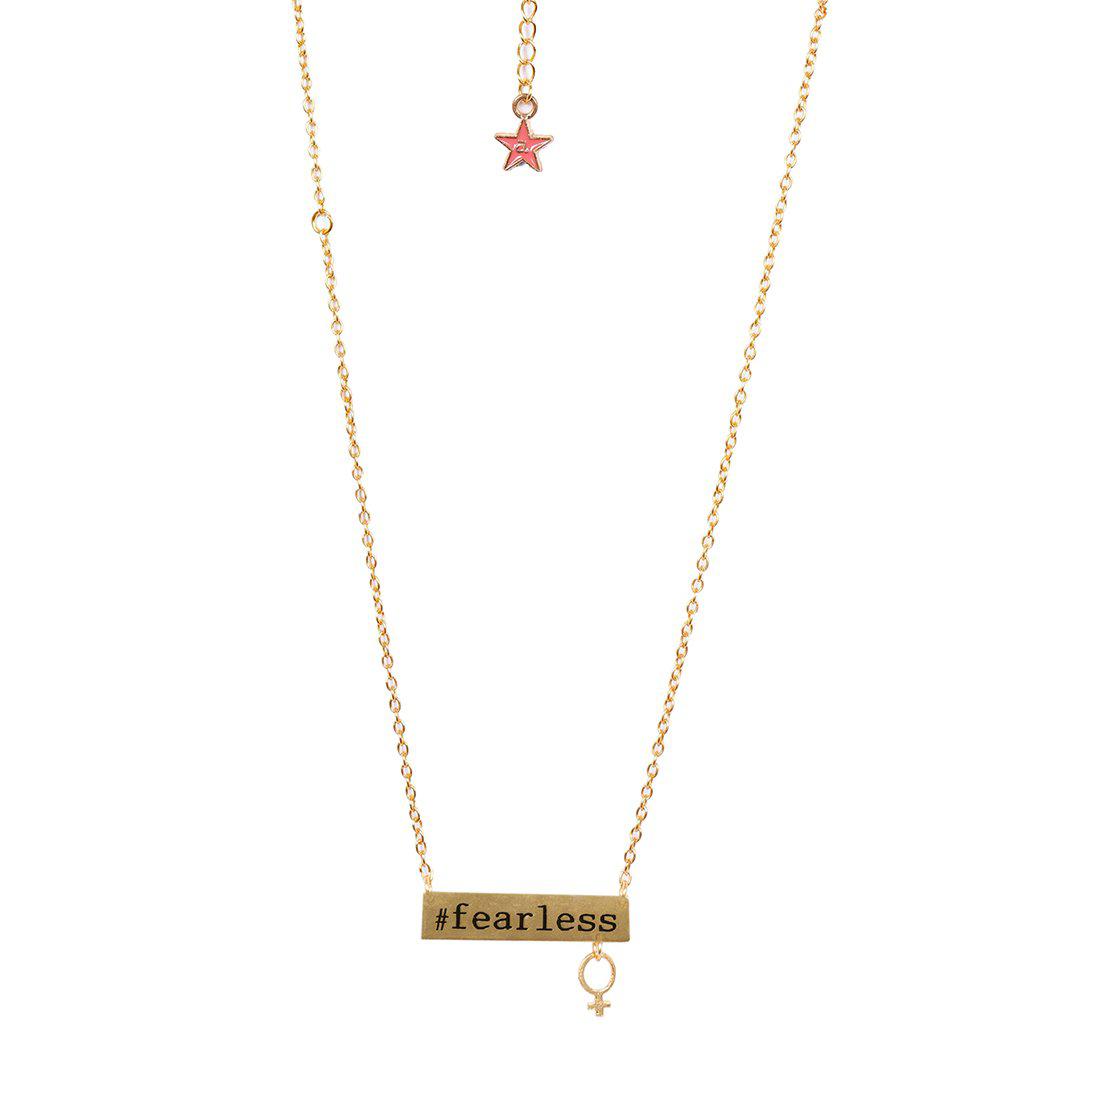 FEARLESS CHAIN NECKLACE WITH GIRL CHARM